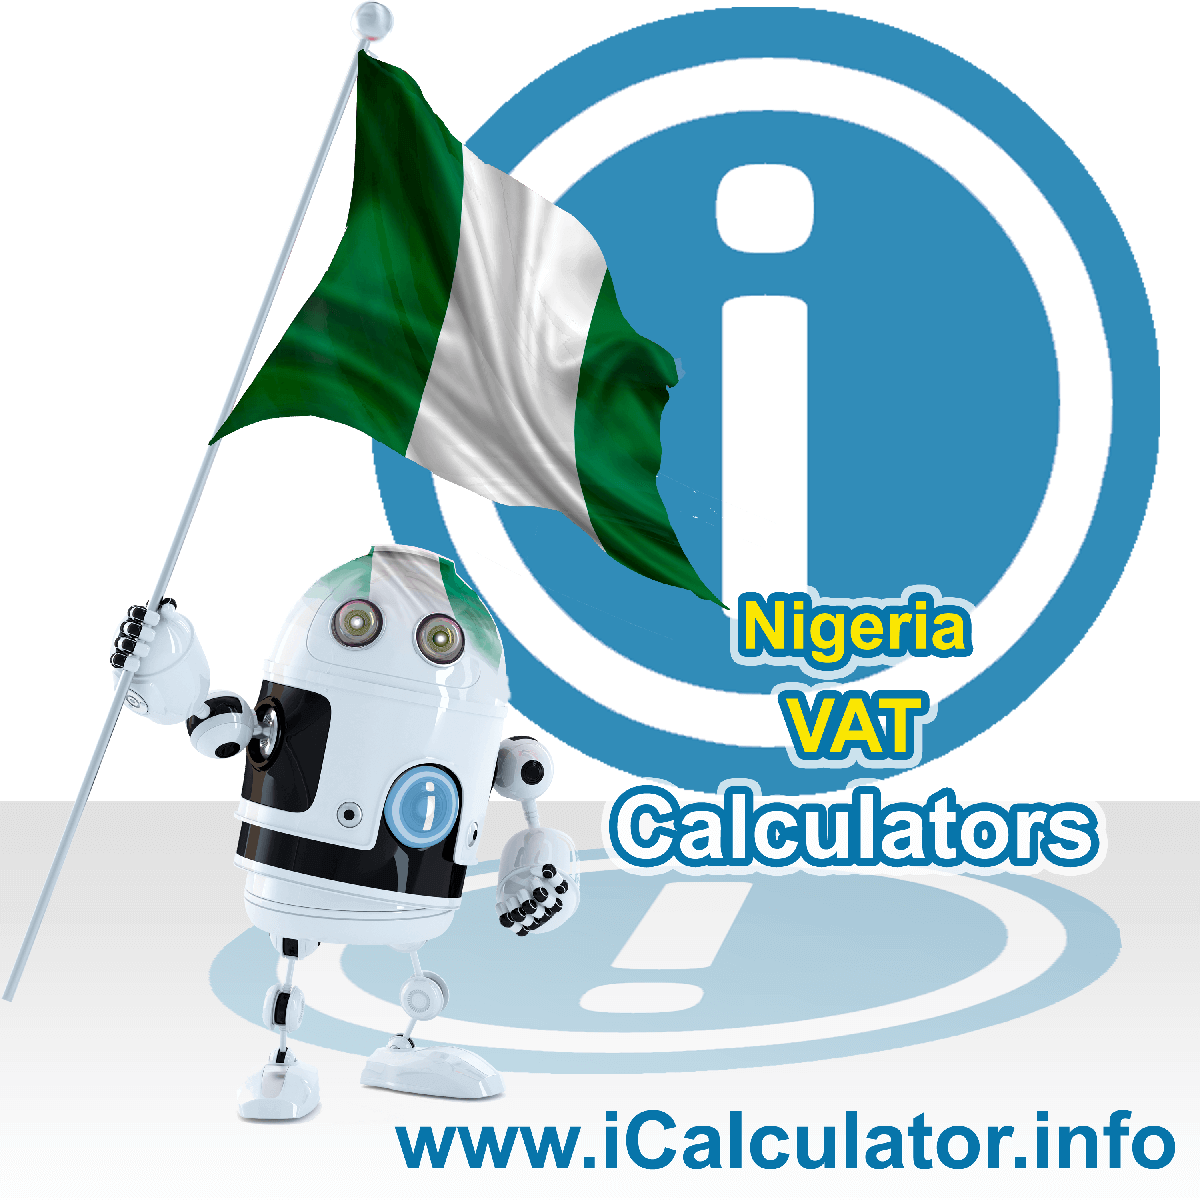 Nigeria VAT Calculator. This image shows the Nigeria flag and information relating to the VAT formula used for calculating Value Added Tax in Nigeria using the Nigeria VAT Calculator in 2023